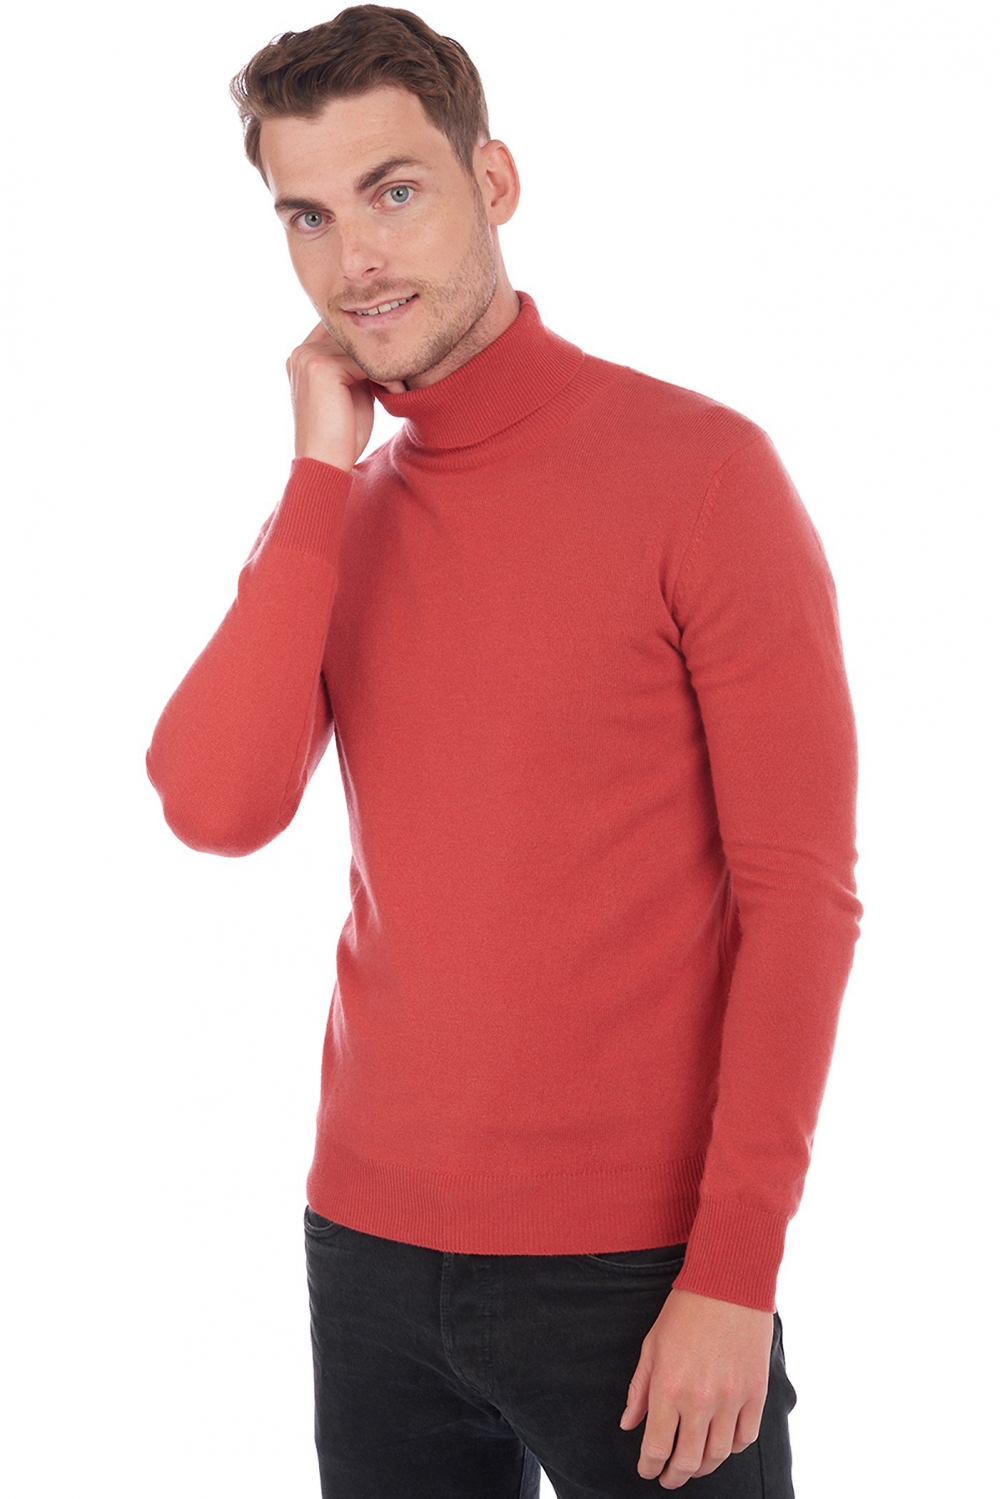 Cashmere uomo tarry first quite coral l